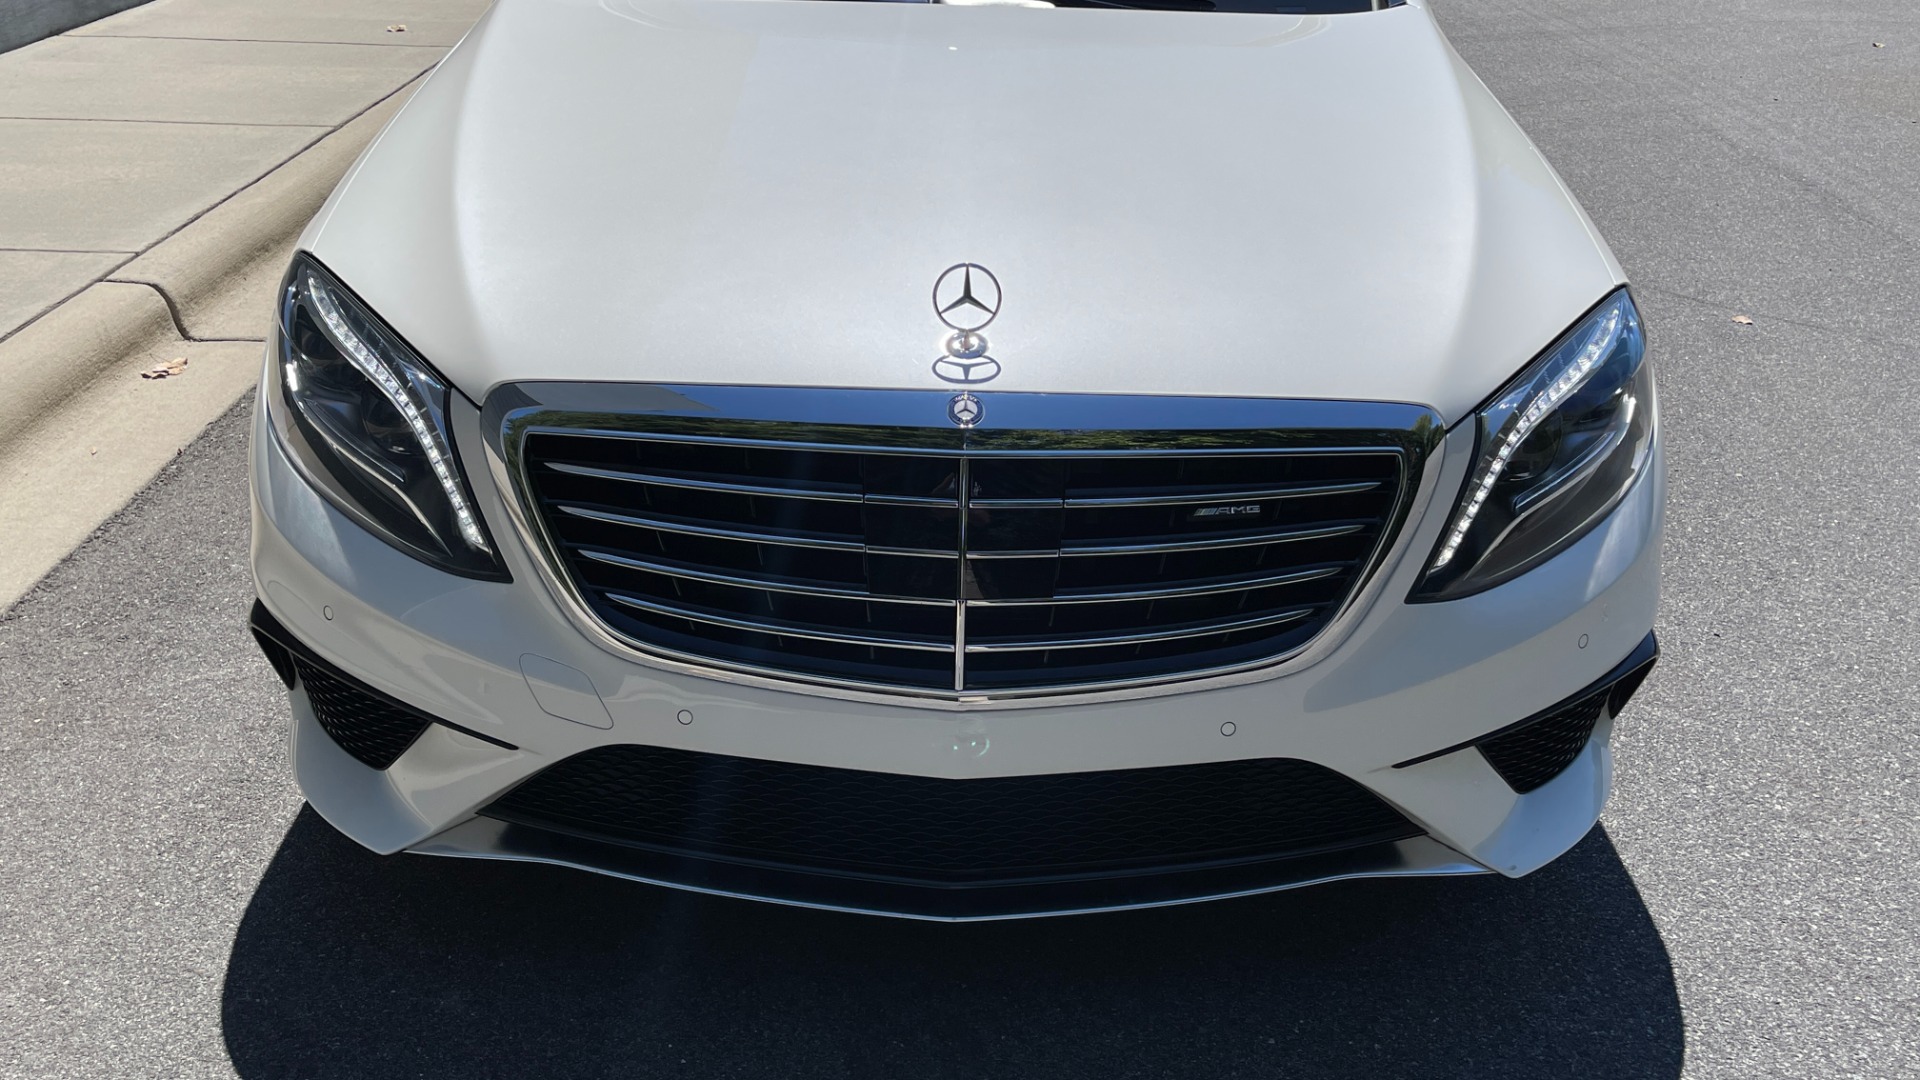 Used 2016 Mercedes-Benz S-Class AMG S63 / EXCLUSIVE TRIM / BURMESTER 3D HIGH END SOUND / DRIVER ASSISTANCE  for sale Sold at Formula Imports in Charlotte NC 28227 46